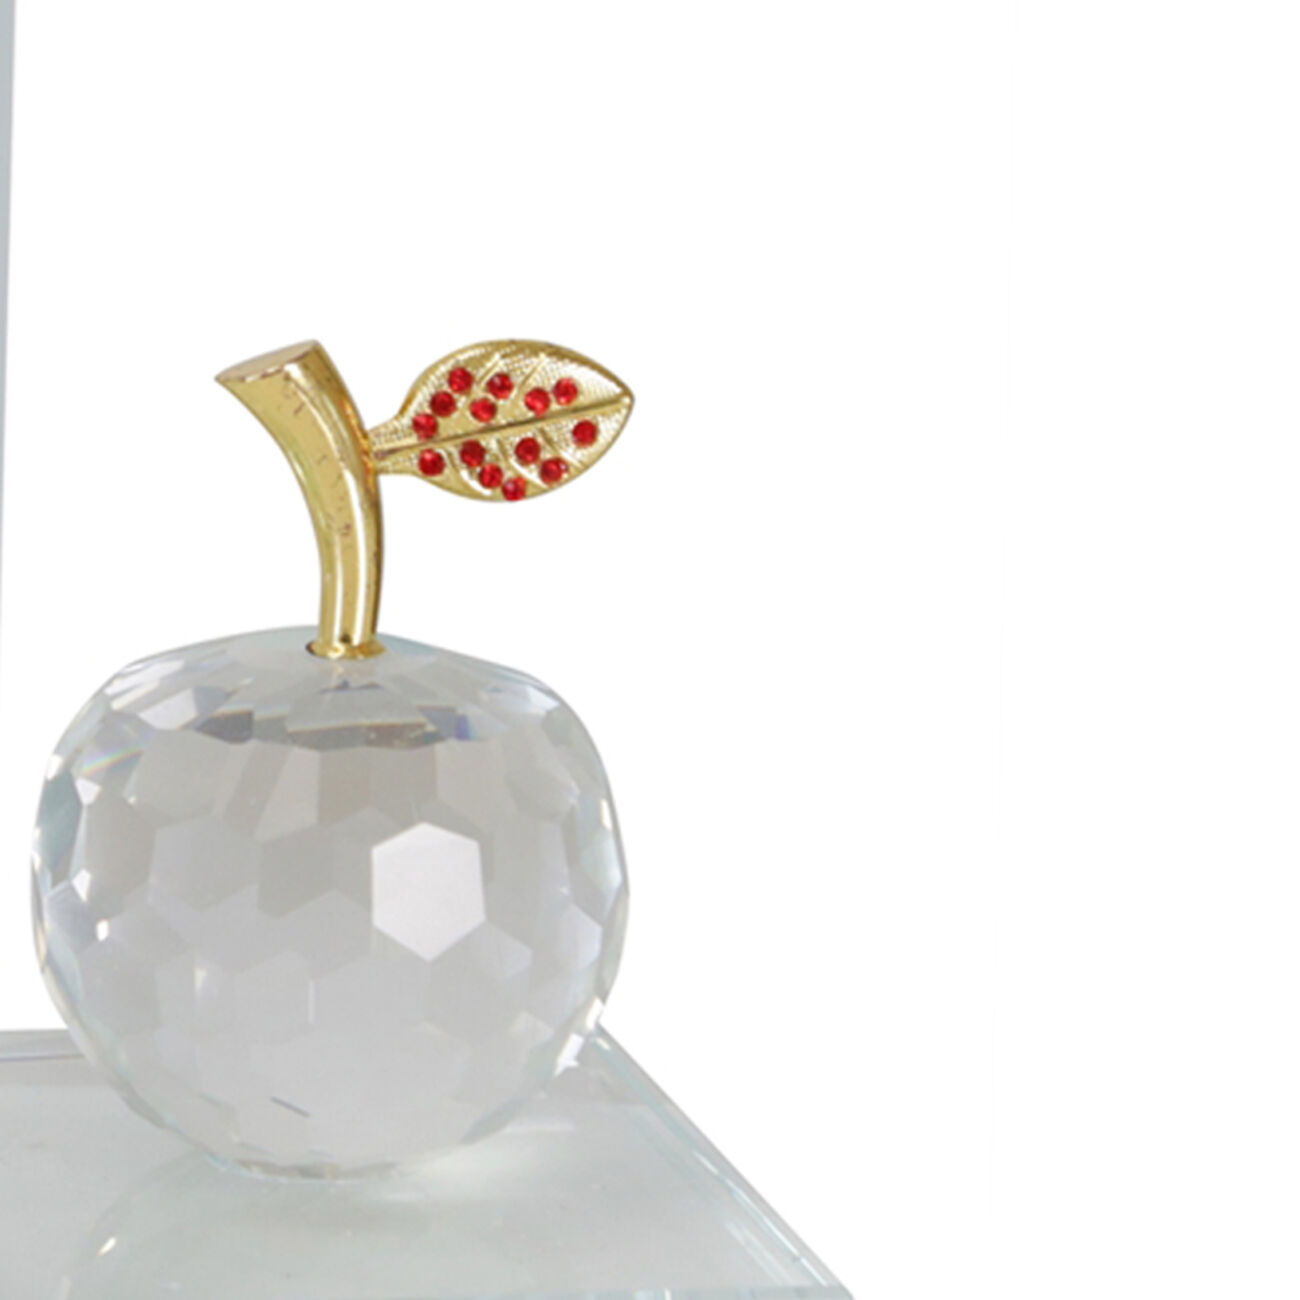 Glass Made Apple Statuette Bookend, Pair of 2, Clear and Gold